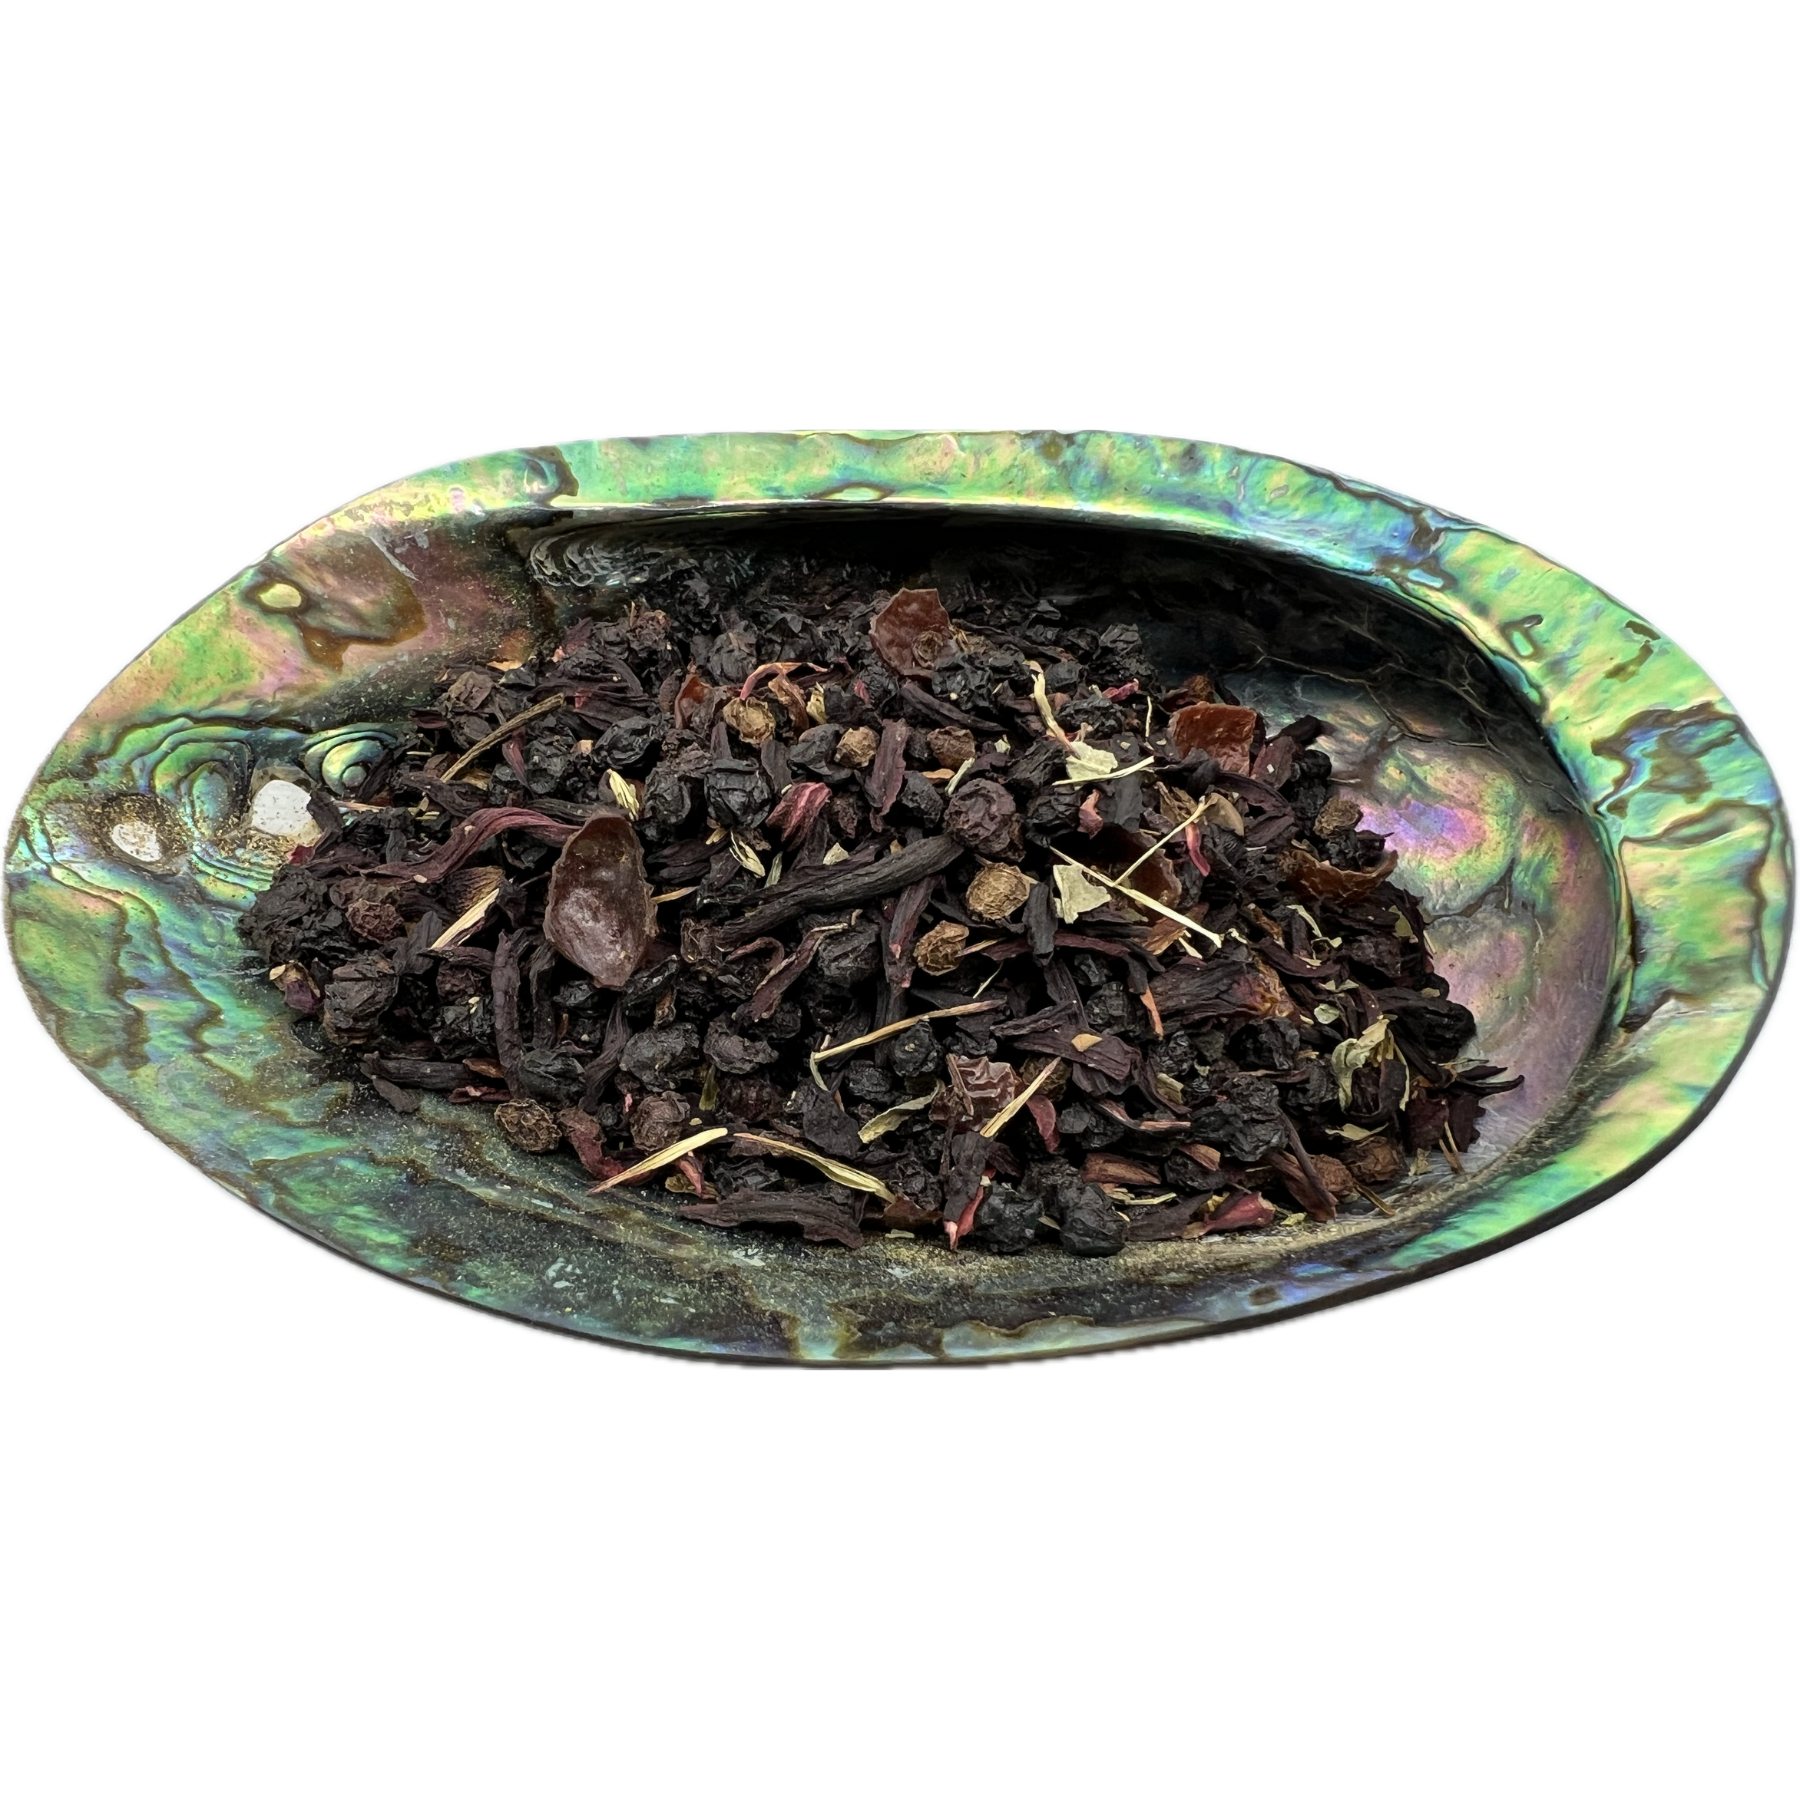 Dried Elderberry Support Tea Organic placed on a colorful shell bowl